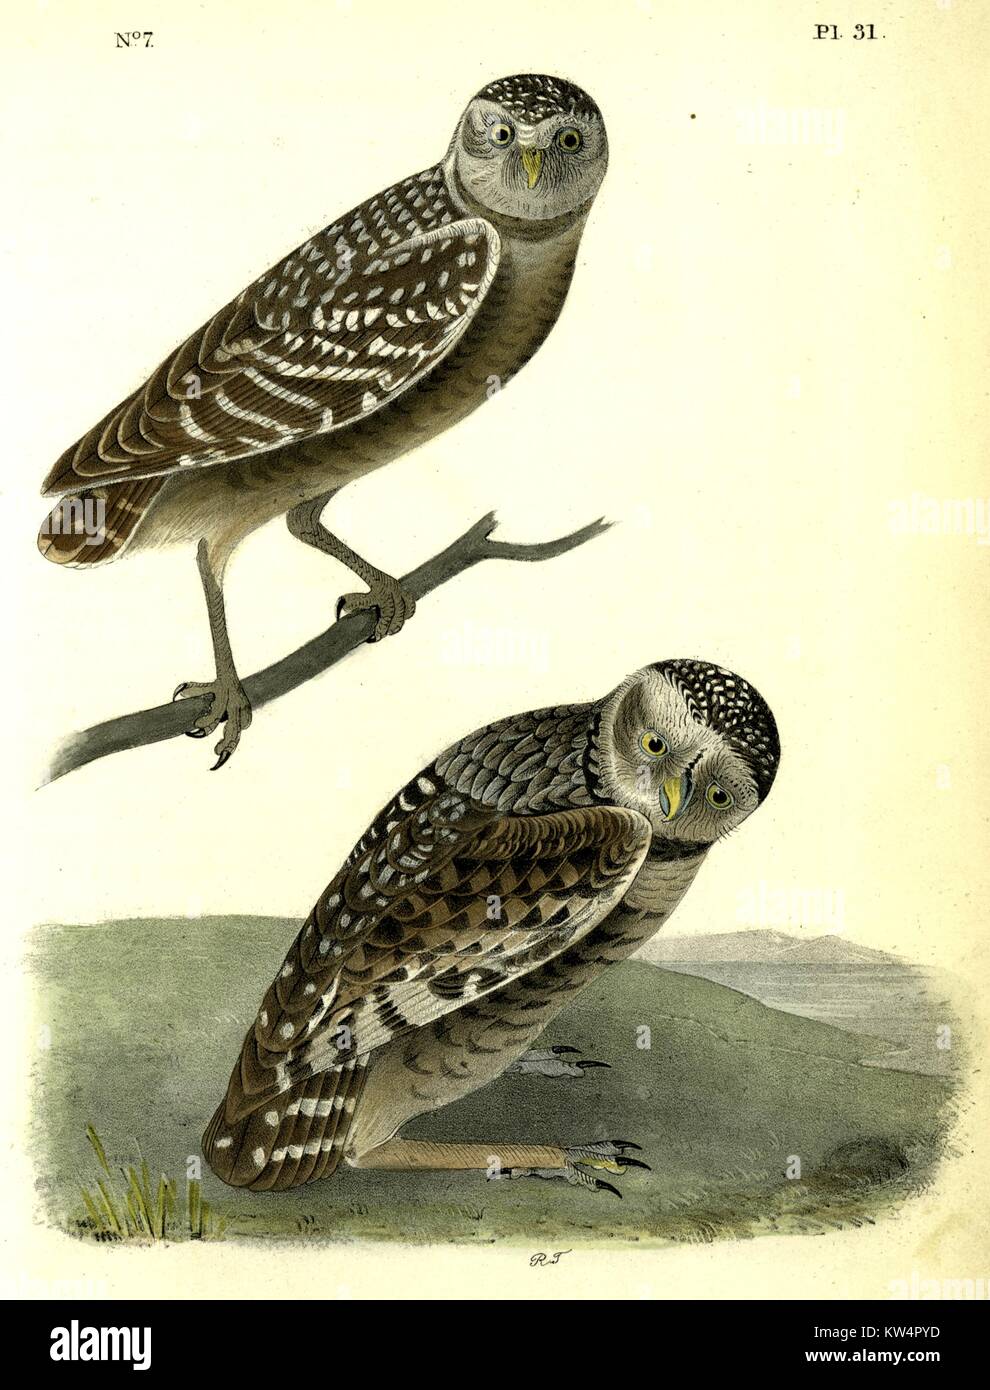 Illustration of Burrowing Day-Owl from the book Birds of America by John James Audubon, 1842. From the New York Public Library. Stock Photo